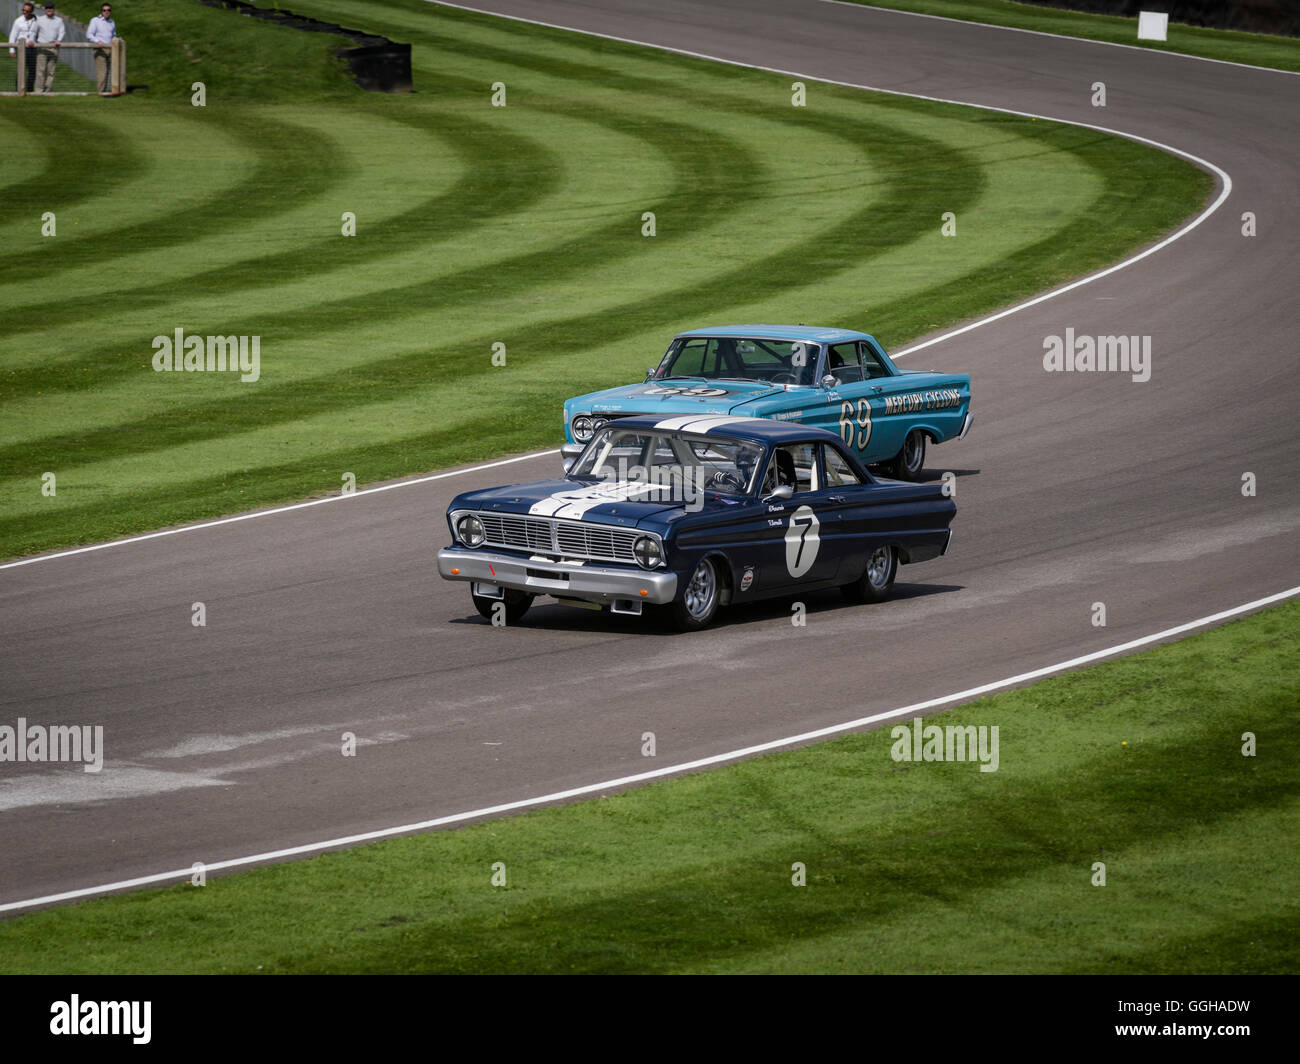 Ford Falcon Sprint, Shelby-Cup, beim Goodwood Revival 2014, Rennsport, Oldtimer, Goodwood, Chichester, Sussex, England, Super B Stockfoto